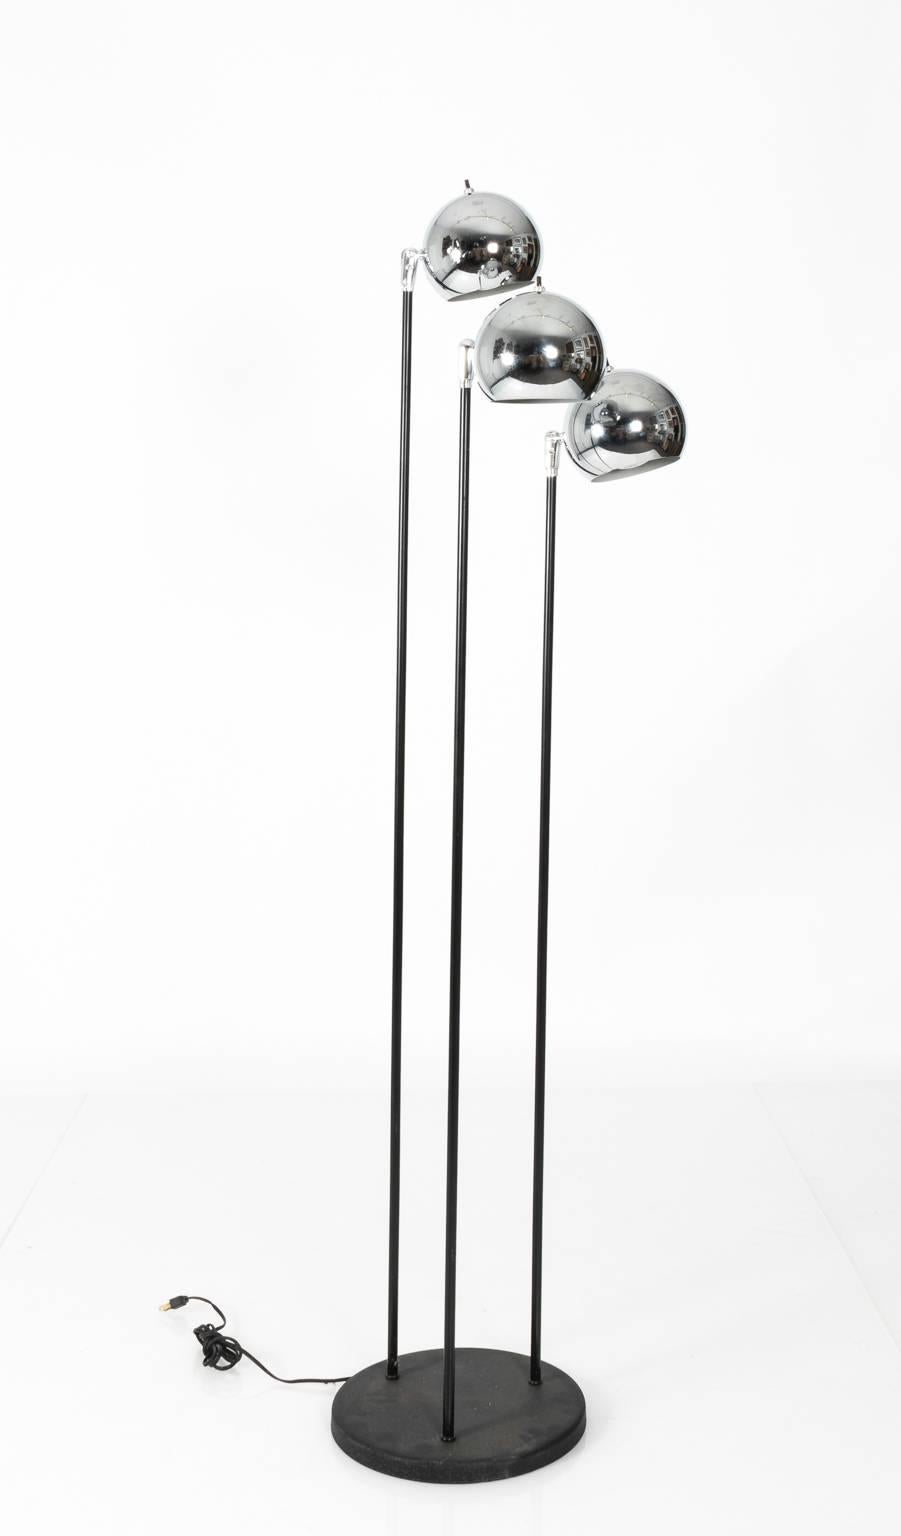 Midcentury Chrome Ball Floor Lamp In Good Condition For Sale In Stamford, CT